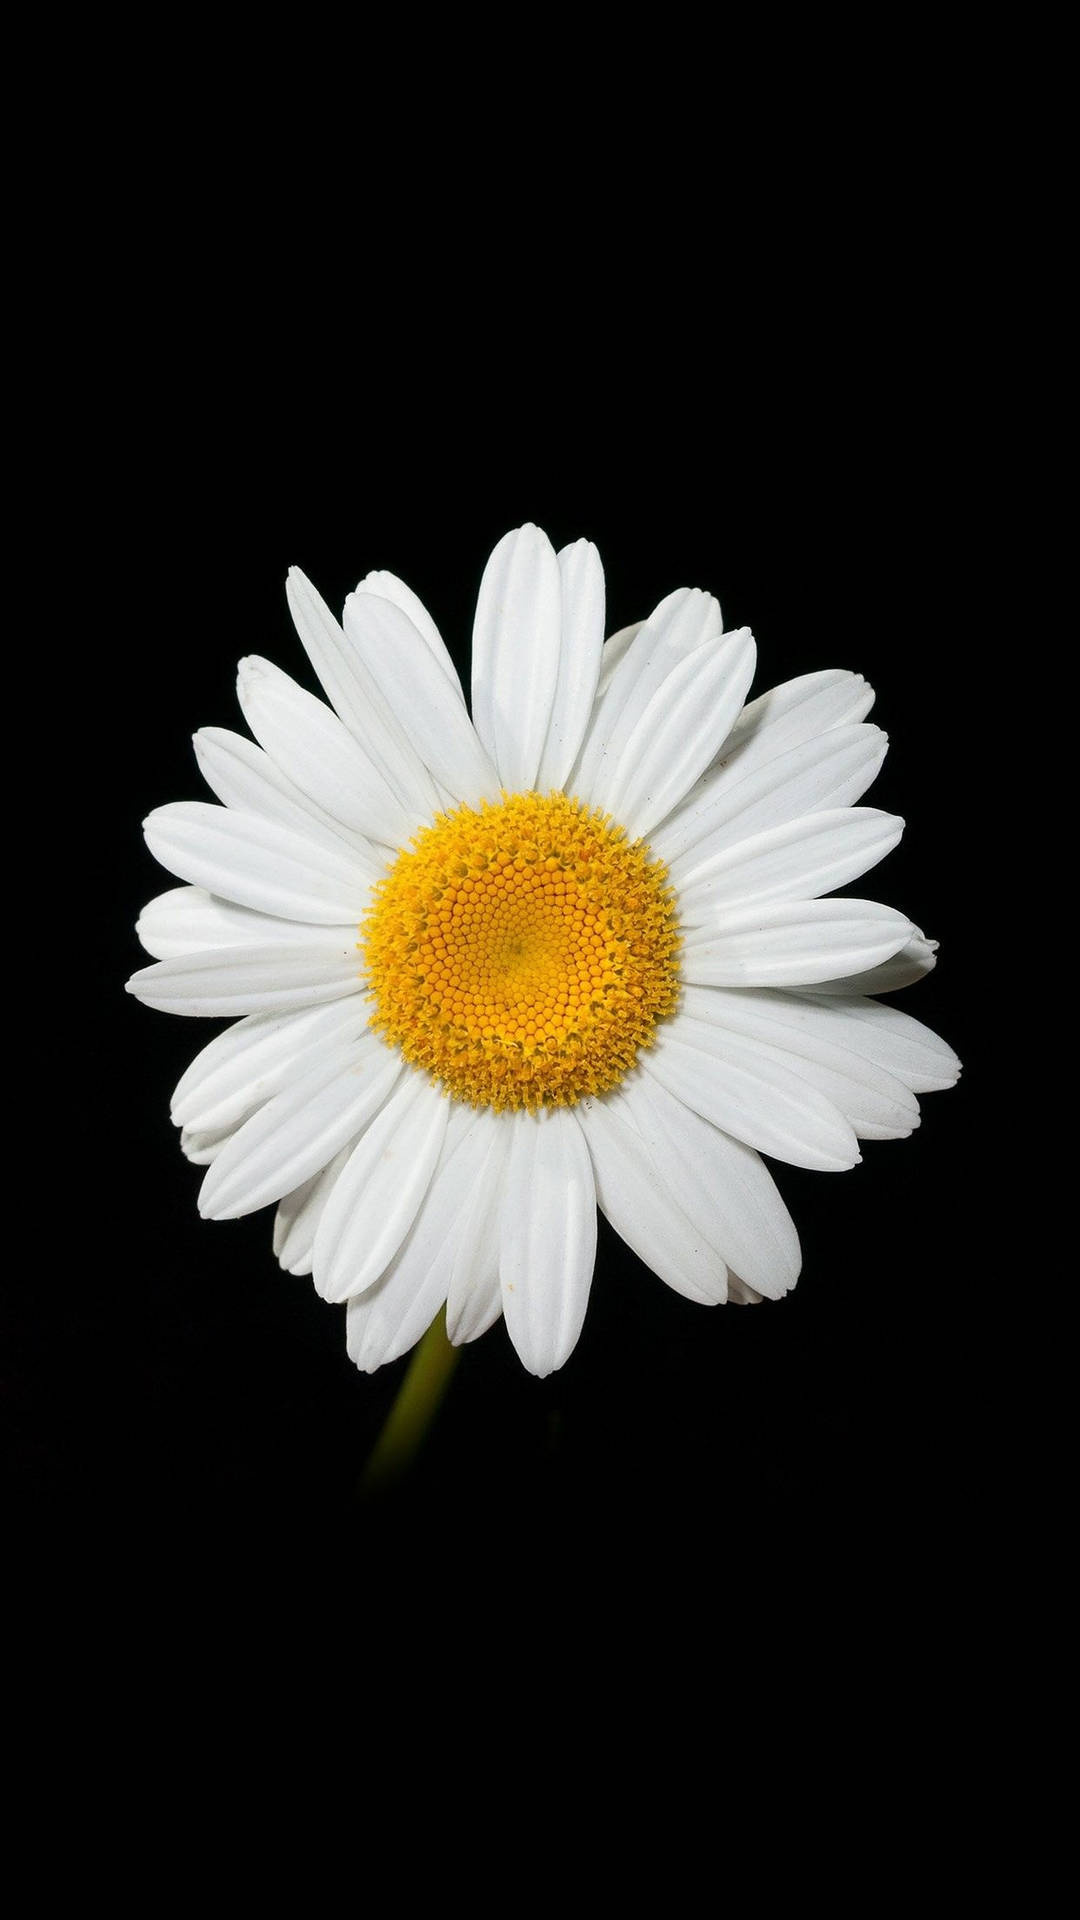 Caption: A Aesthetic White Daisy On Black Background For Phone Wallpaper